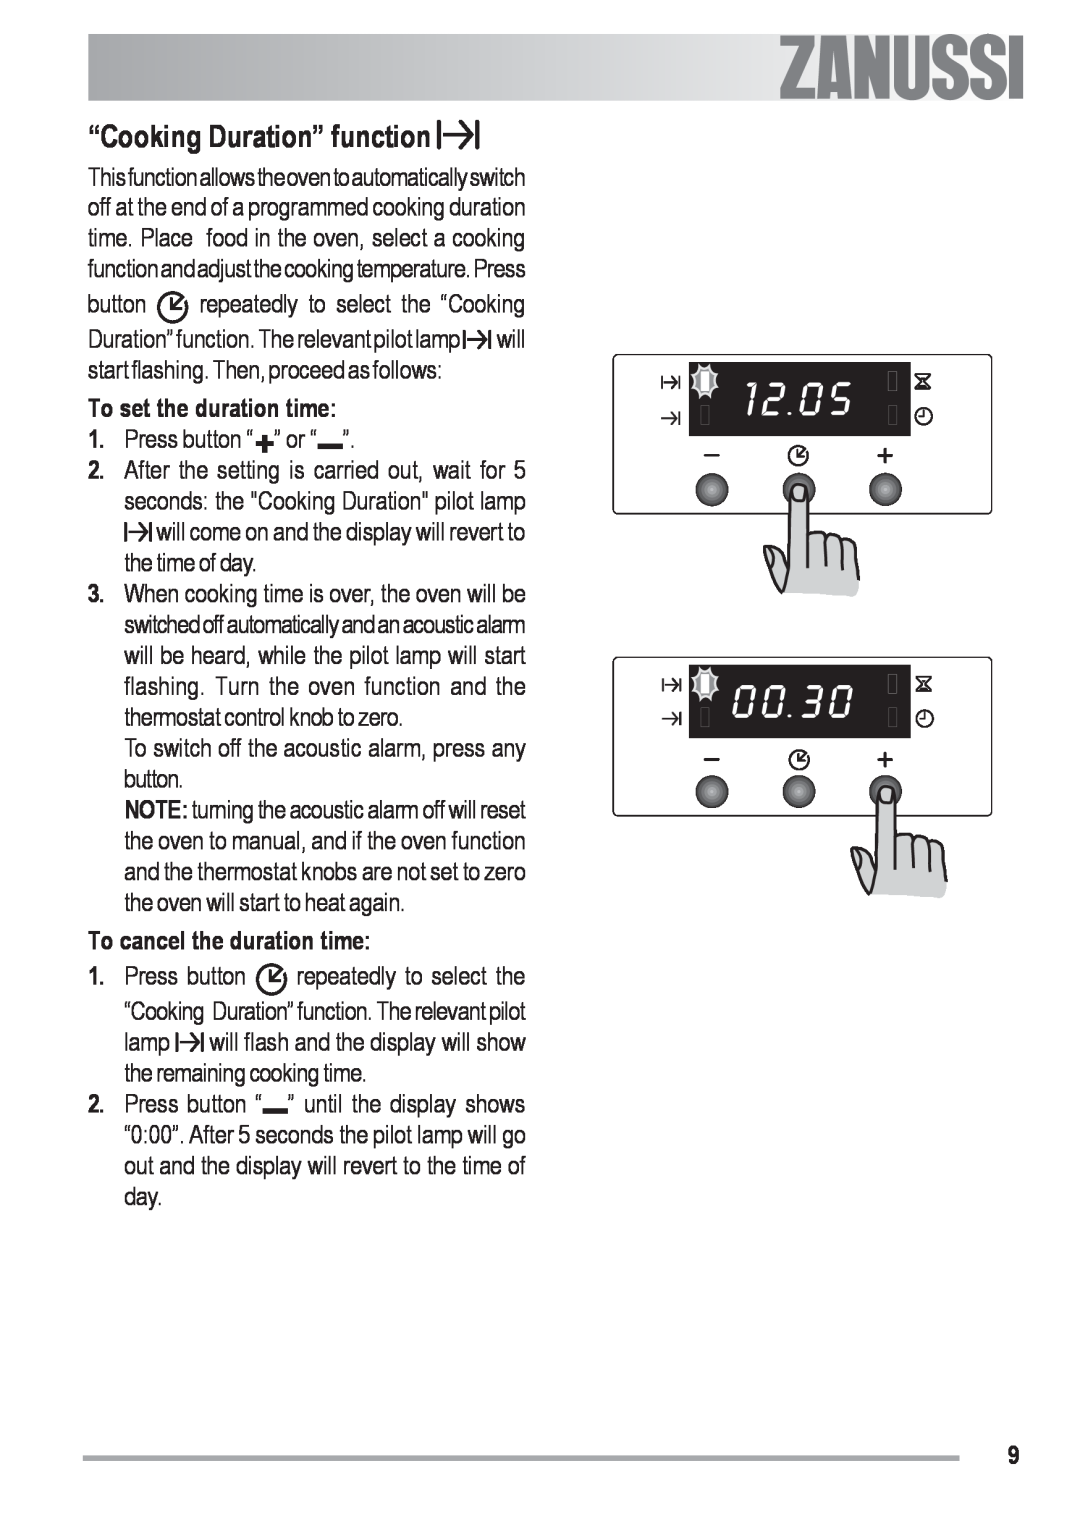 Zanussi ZOB 330 manual “Cooking Duration” function, To set the duration time, Press button “ ” or “ ” 